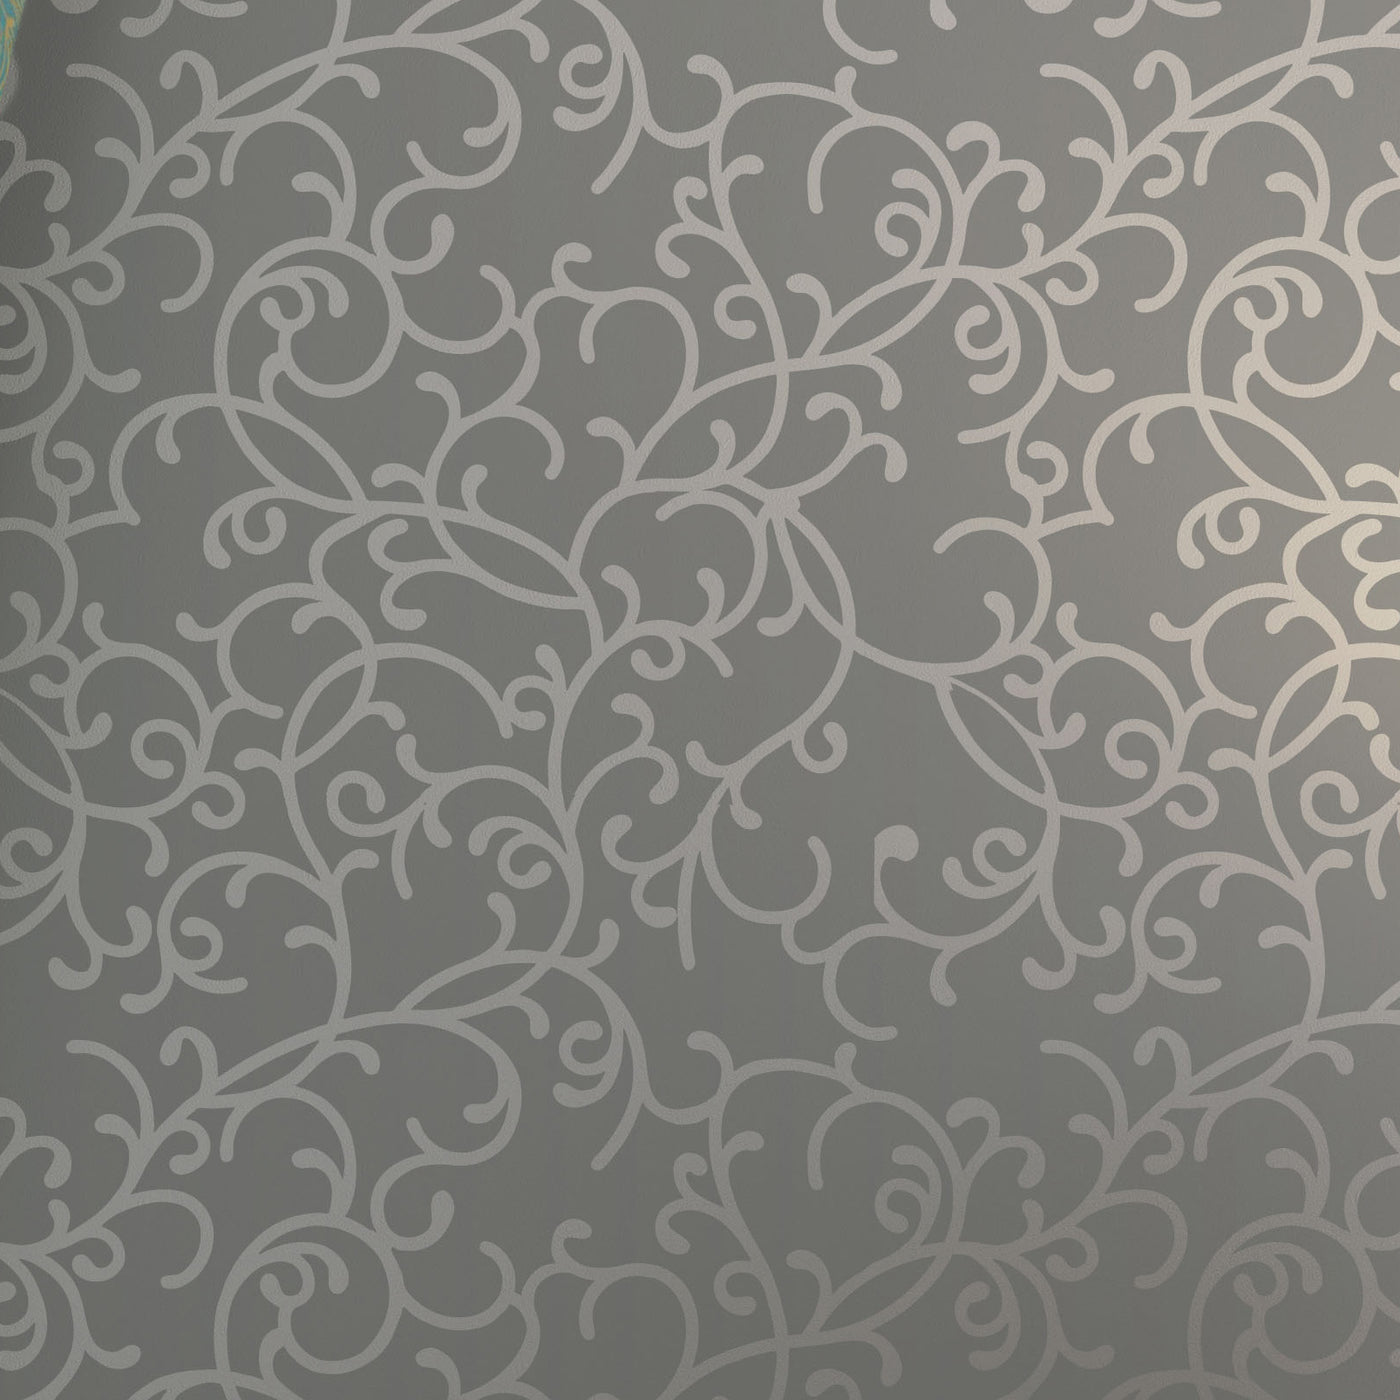 Scroll and Damask Wall Stencils